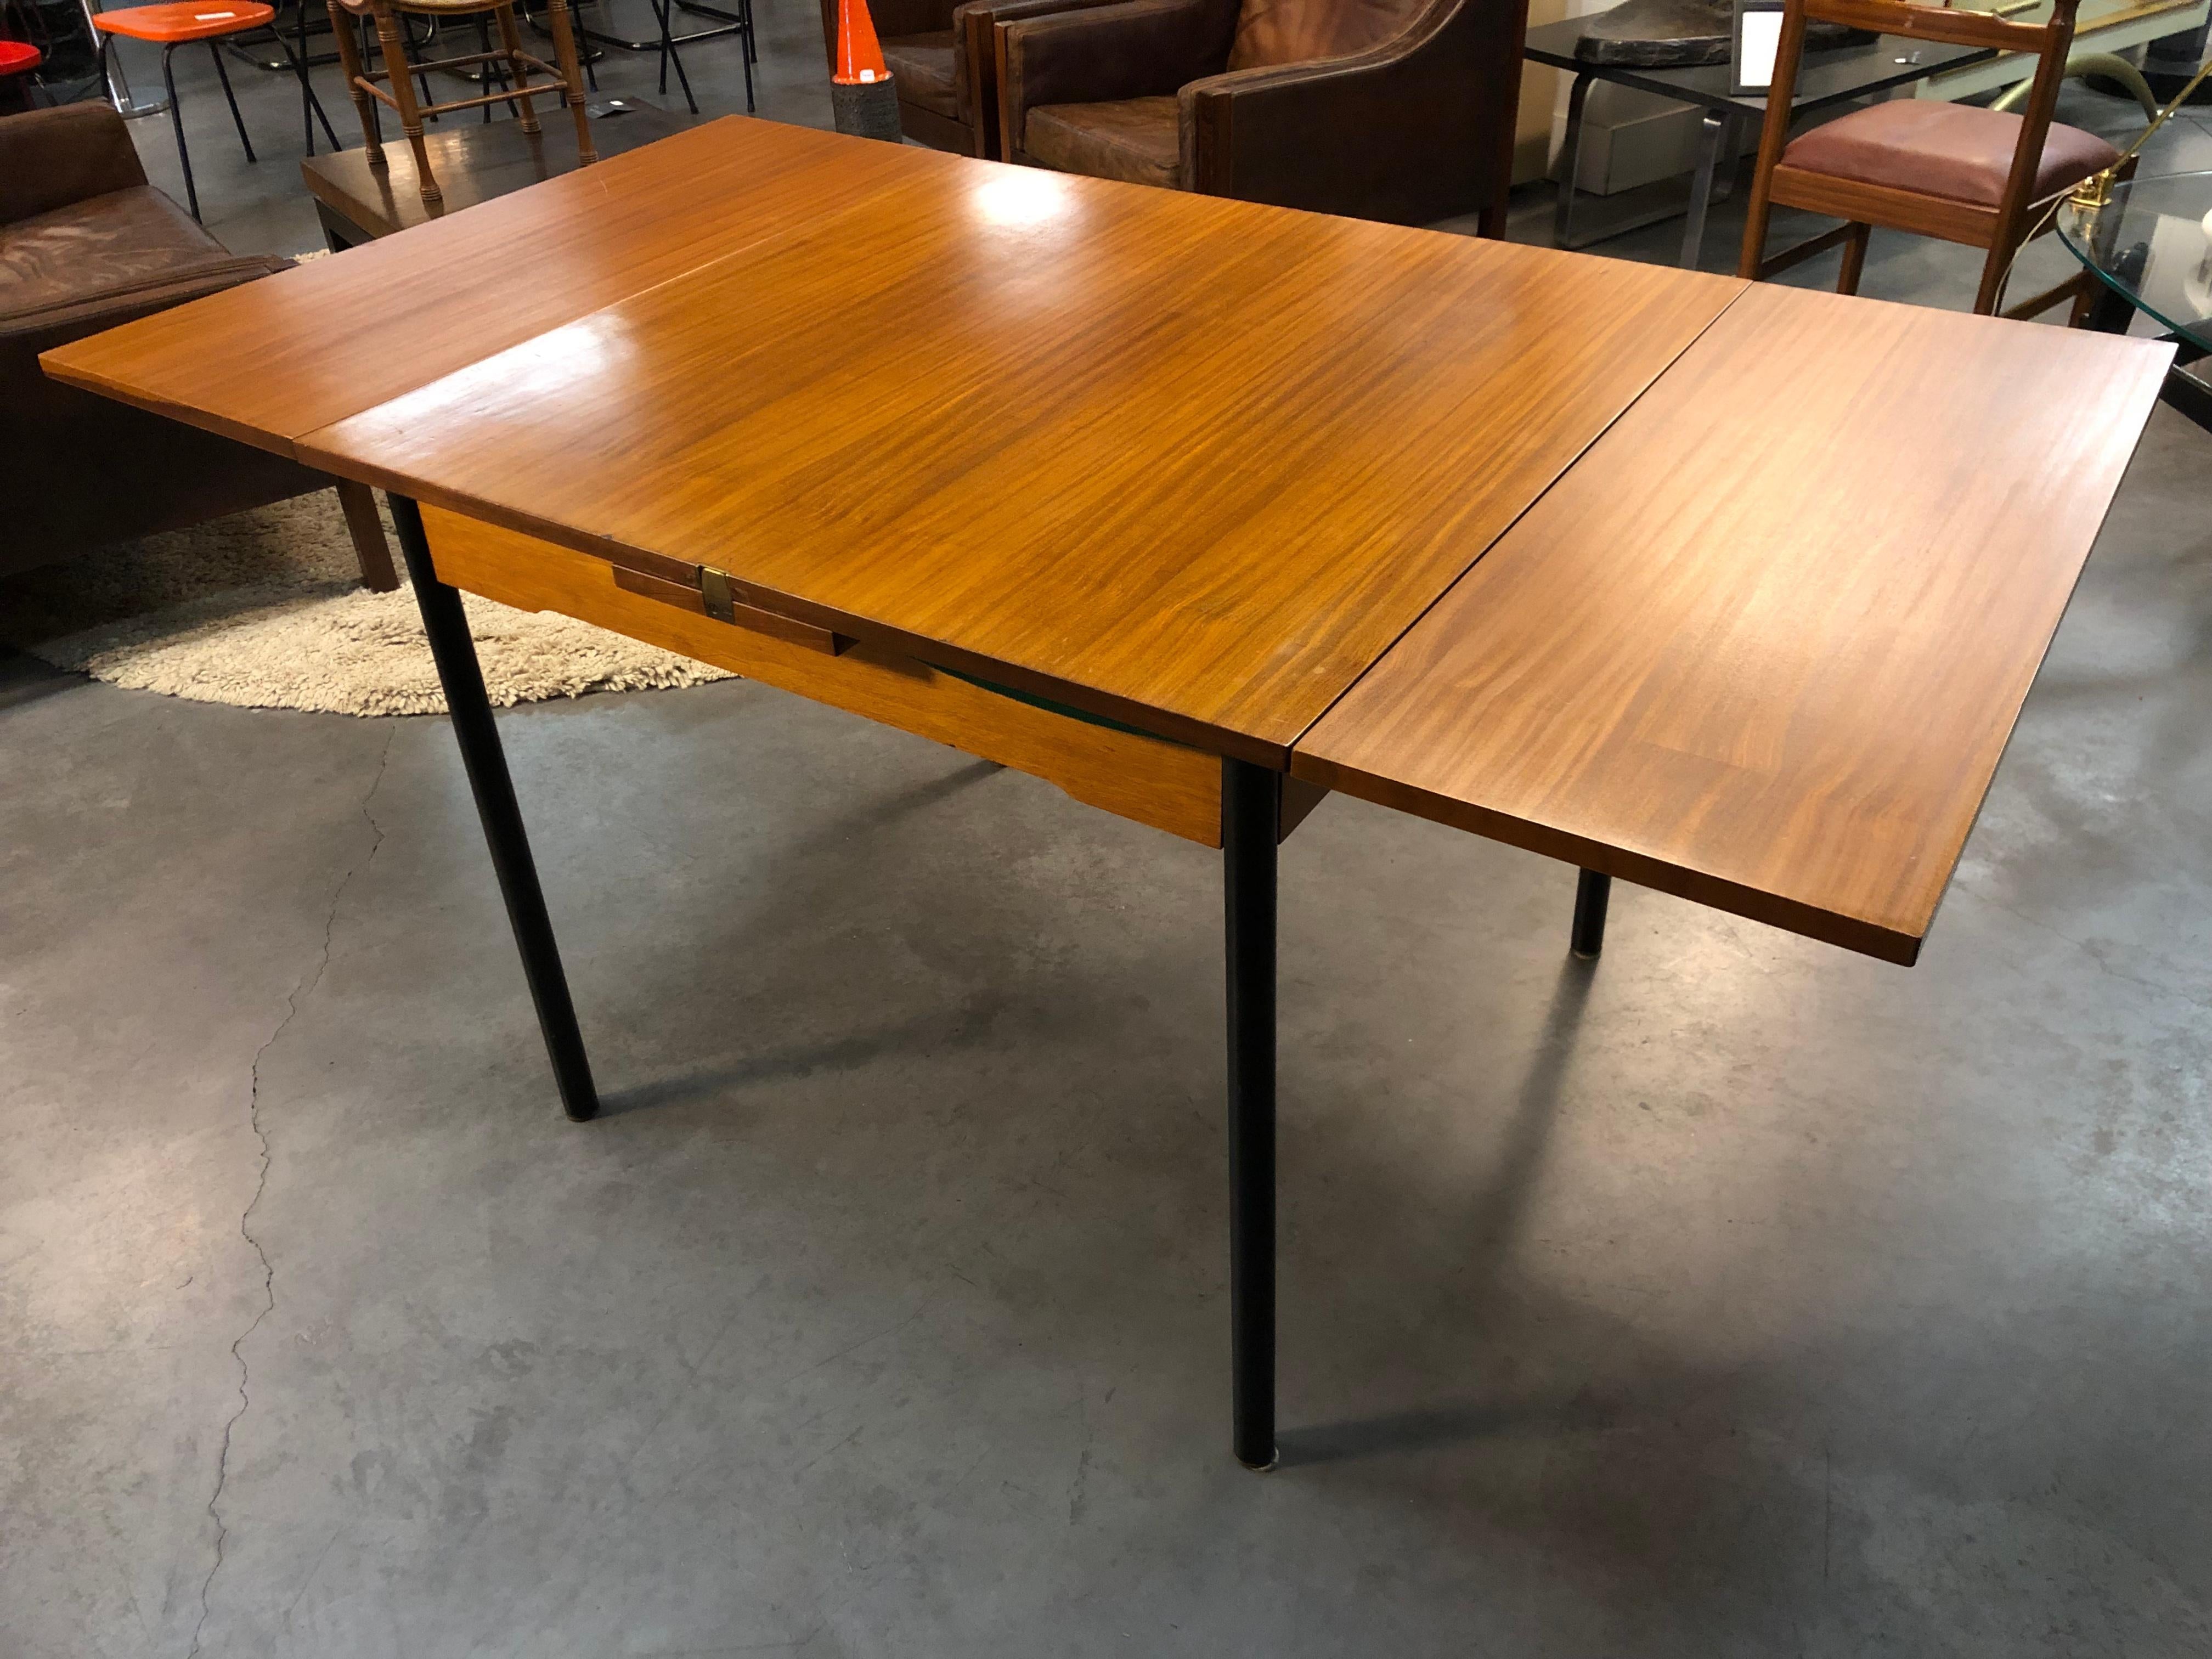 Interesting table that can be either a dining table or a gaming table.
Unknown designer but some details show that it’s a  a reconstruction area furniture  just after the  war very efficient at low budget. 
So some kind of typicalities that can